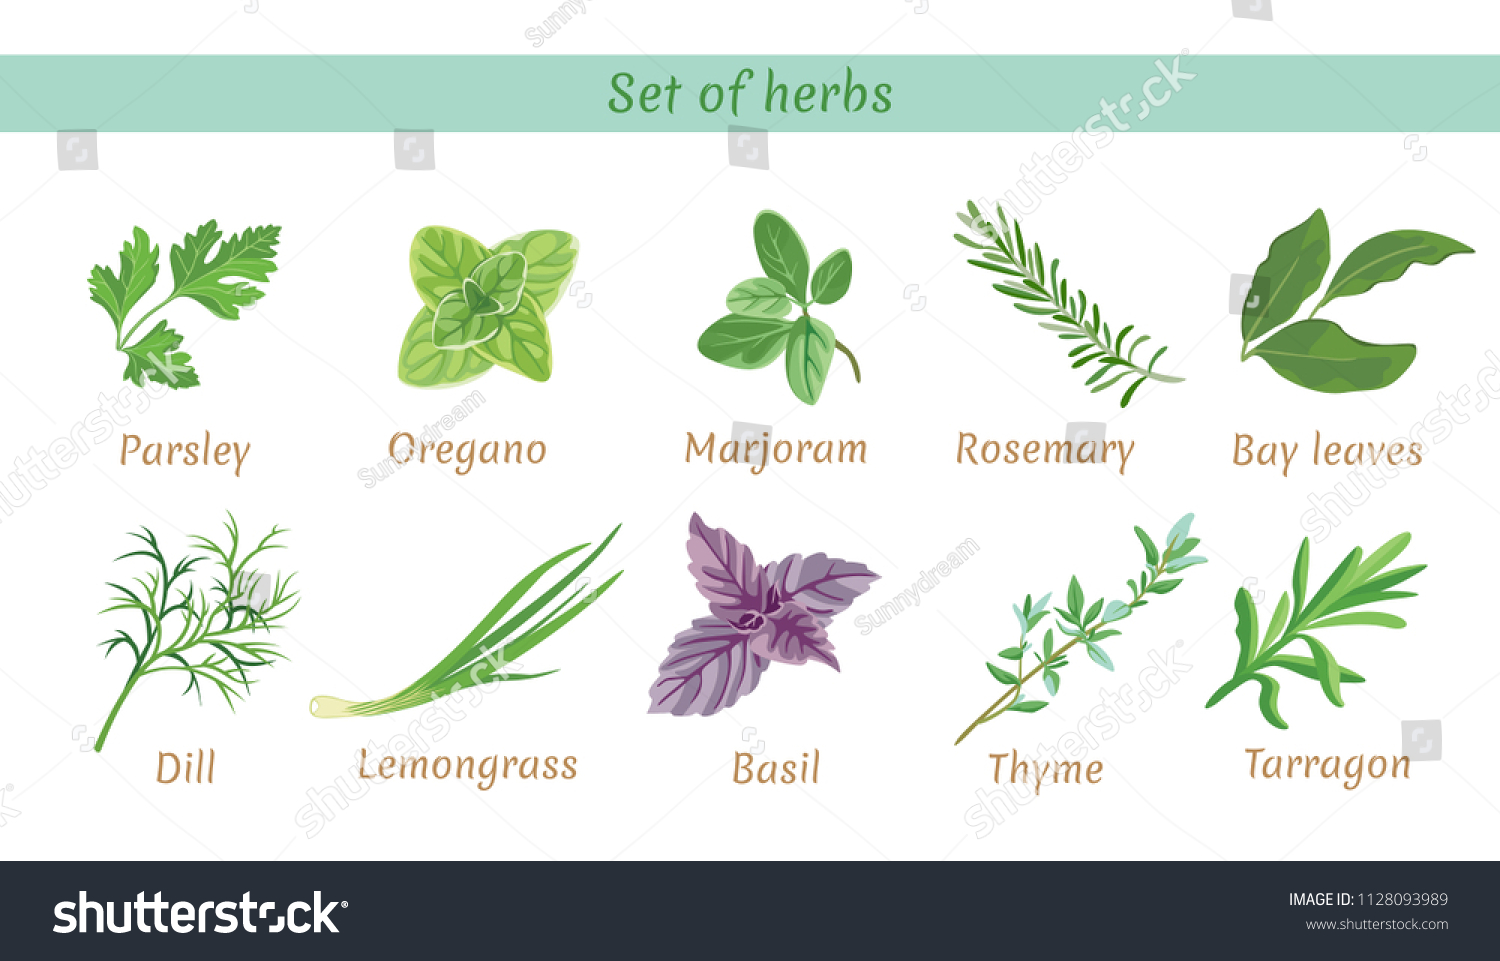 Set of herbs. Collection of vector icons in flat style on white background. Parsley, thyme, oregano, marjoram, dill, lemongrass, tarragon, bay leaves, basil,  rosemary. #1128093989